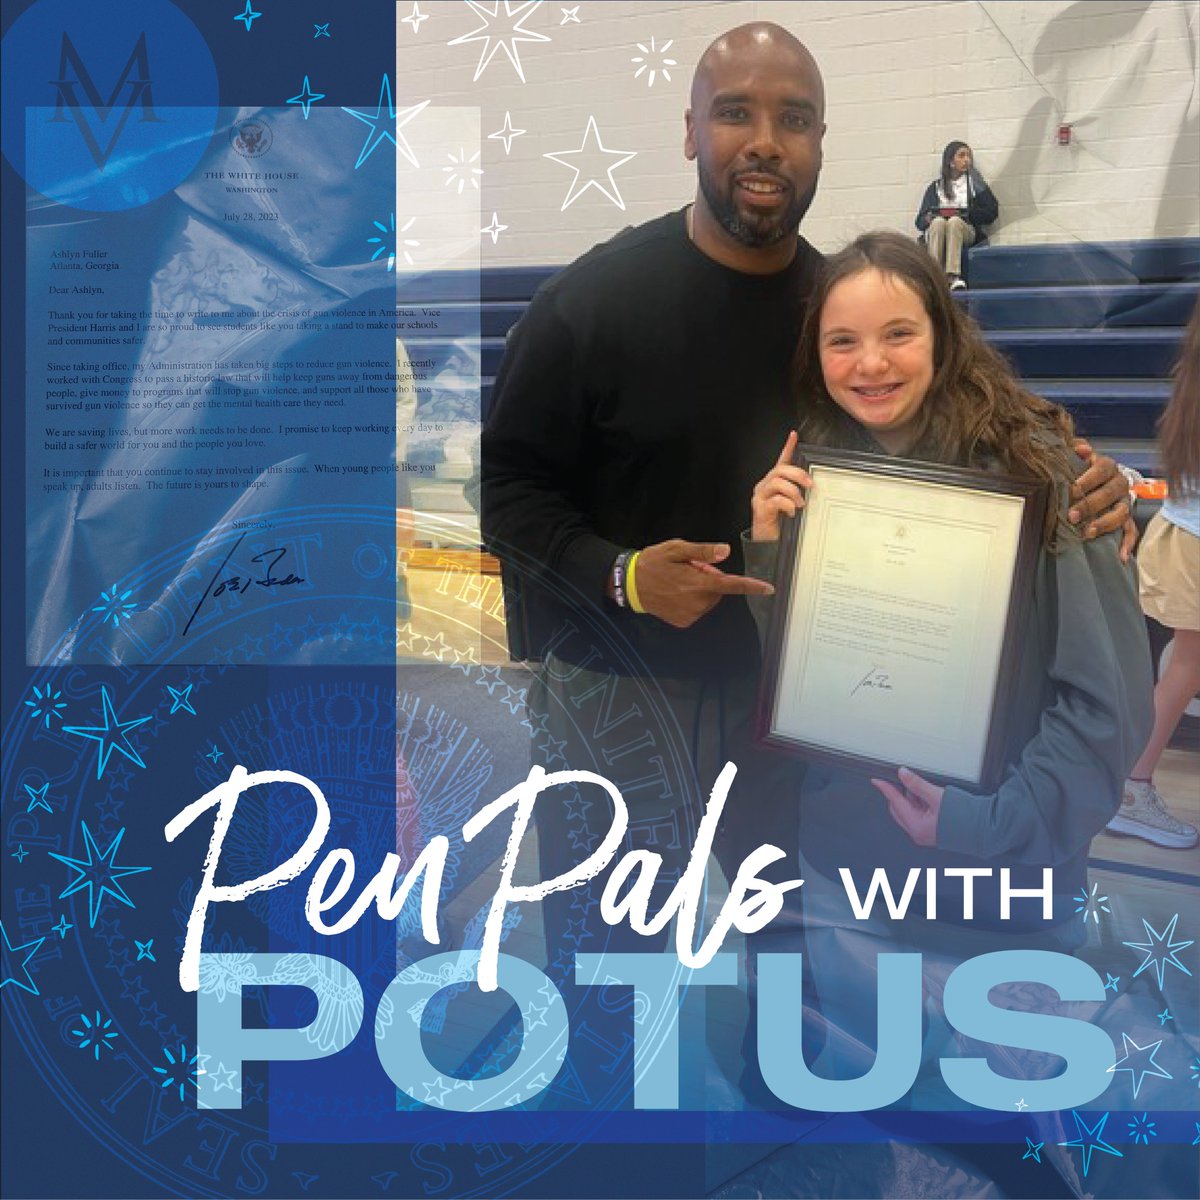 Meet Ashlyn Fuller, Class of 2030 visionary! 🌟 Armed with a mission to combat gun violence, she crafted a bold 16-page letter to the President and got a response from @POTUS himself! 🚀 Let's follow Ashlyn's lead and make a difference! 💪 #LeadFromWhereYouAre #ImpactReady